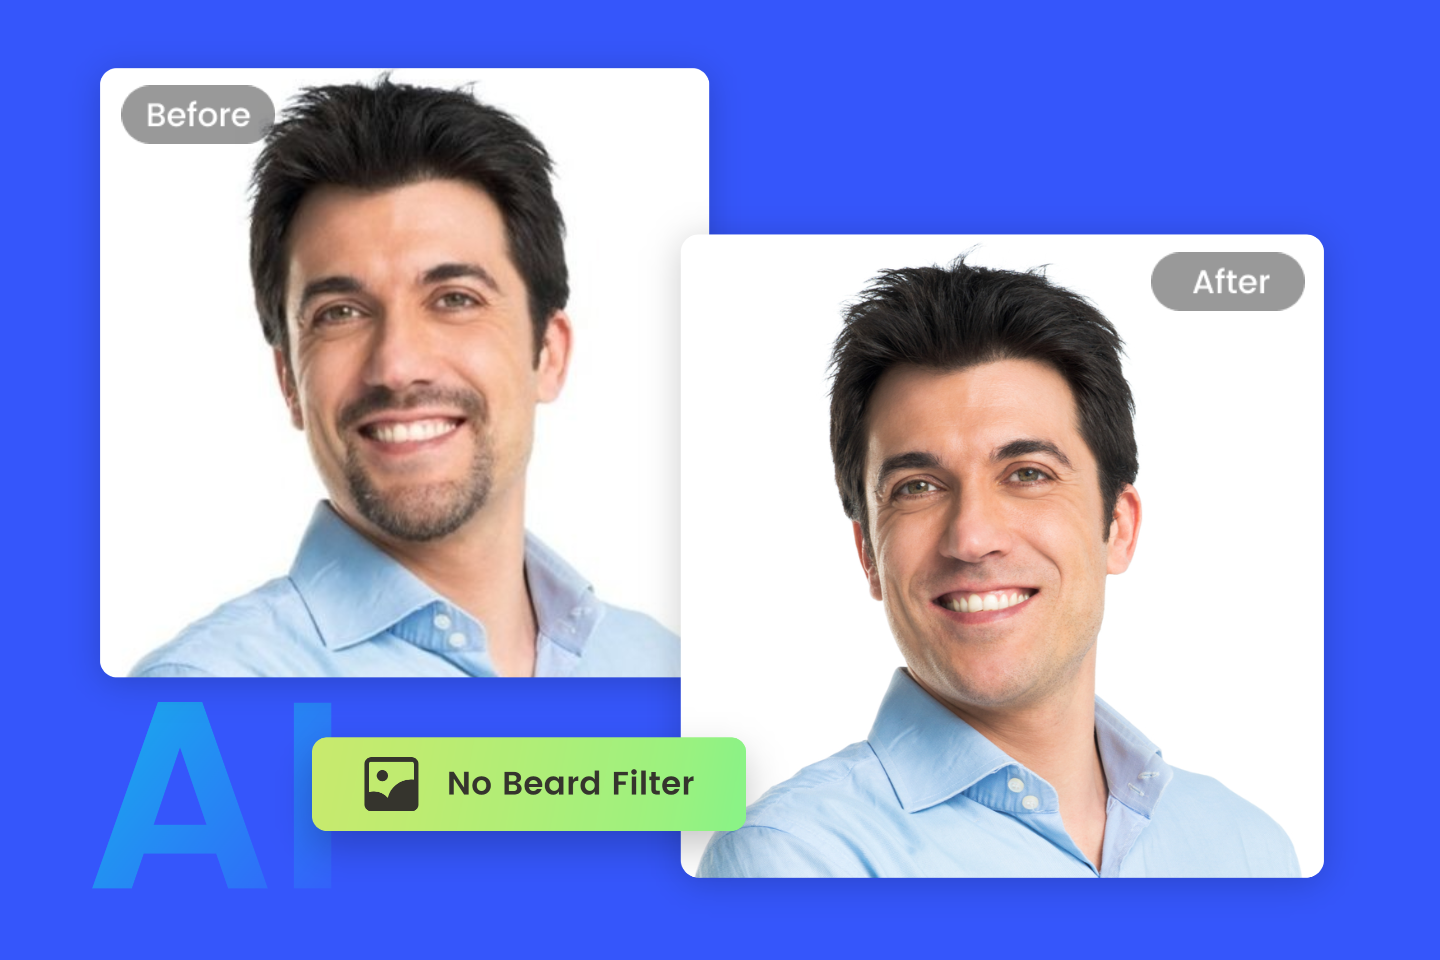 No beard filter banner with before and after contrast photo with a man